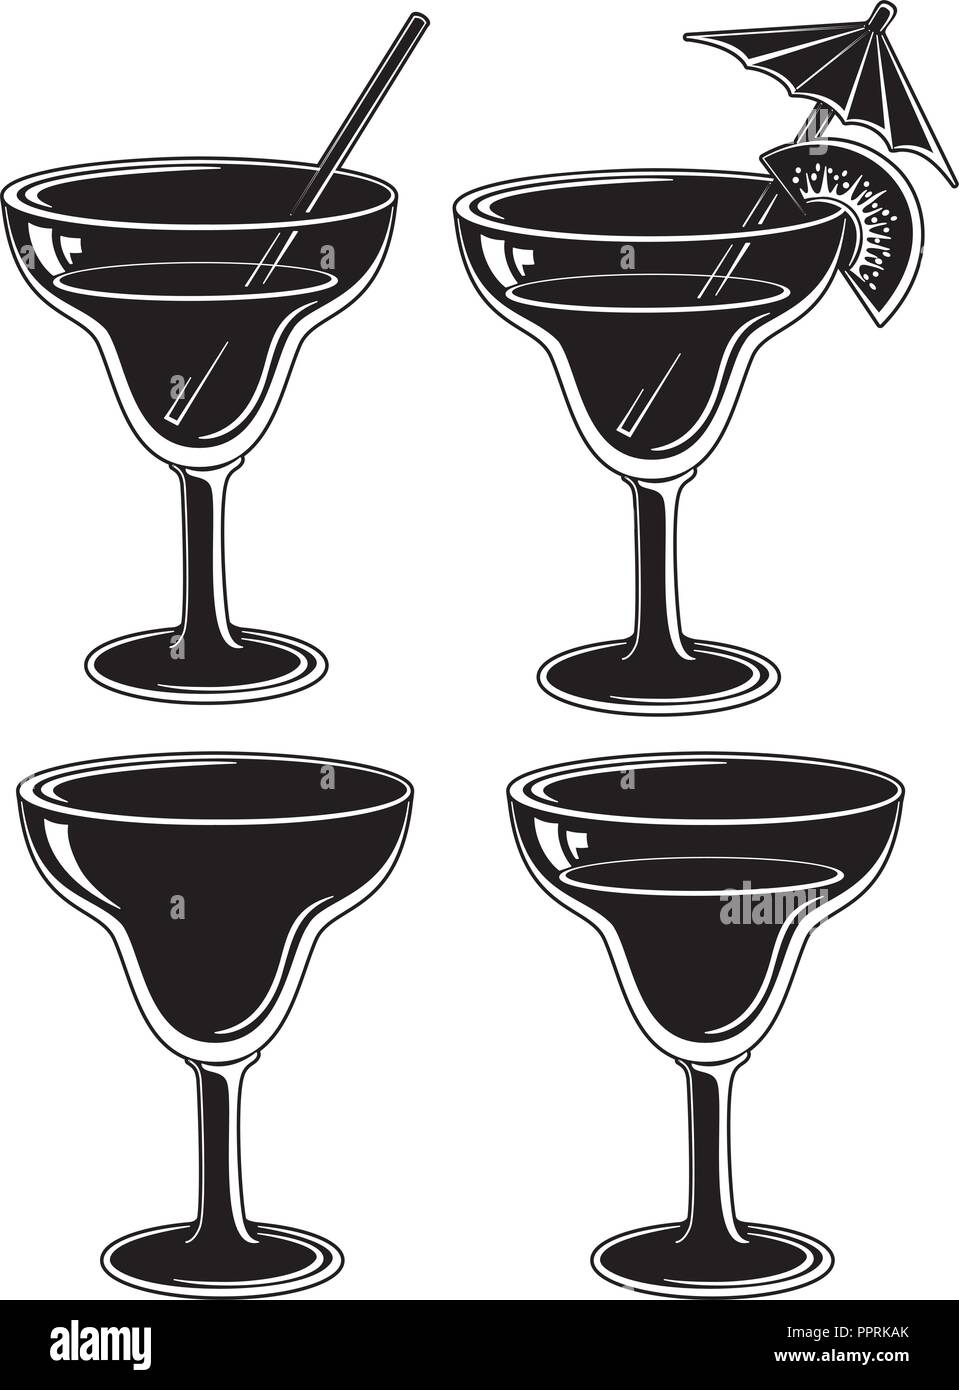 Glasses with drink, set: empty, with a drink, with a kiwifruit and straw. Symbolical pictogram, black contour on white background. Vector Stock Vector